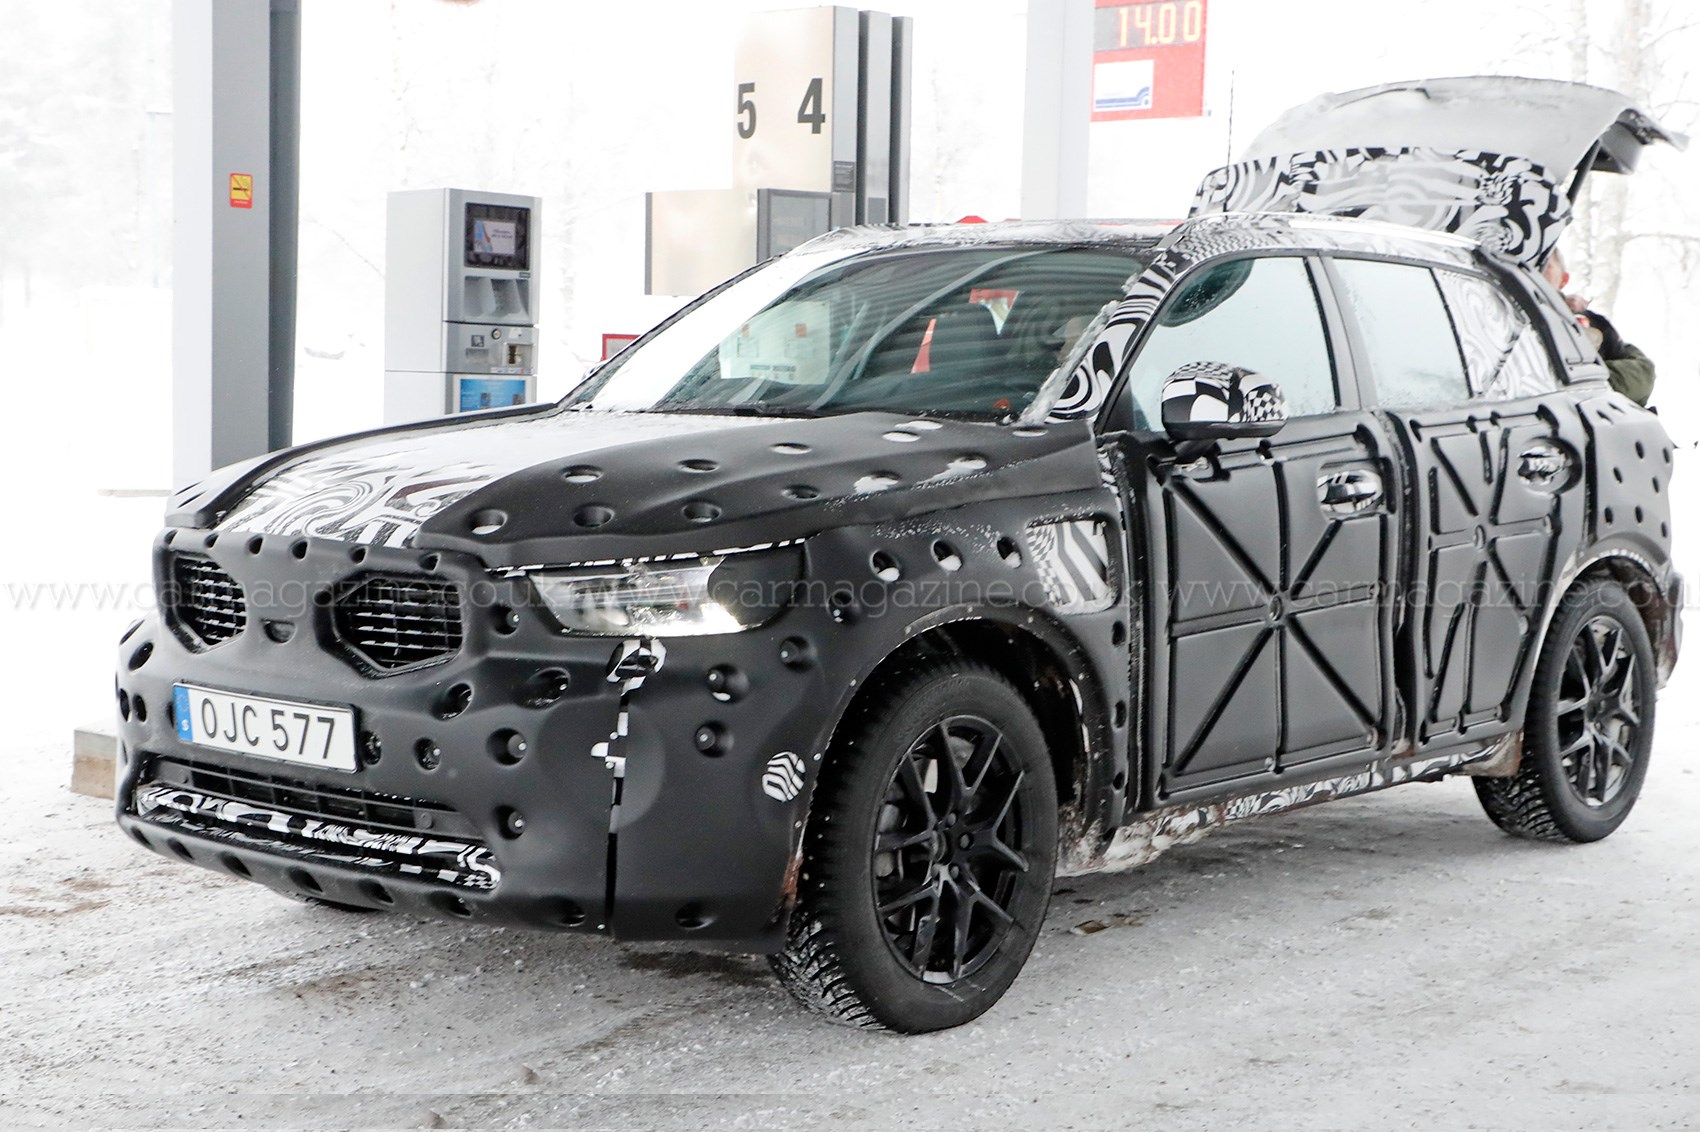 Volvo XC40 SUV spied: first peek at new crossovers 